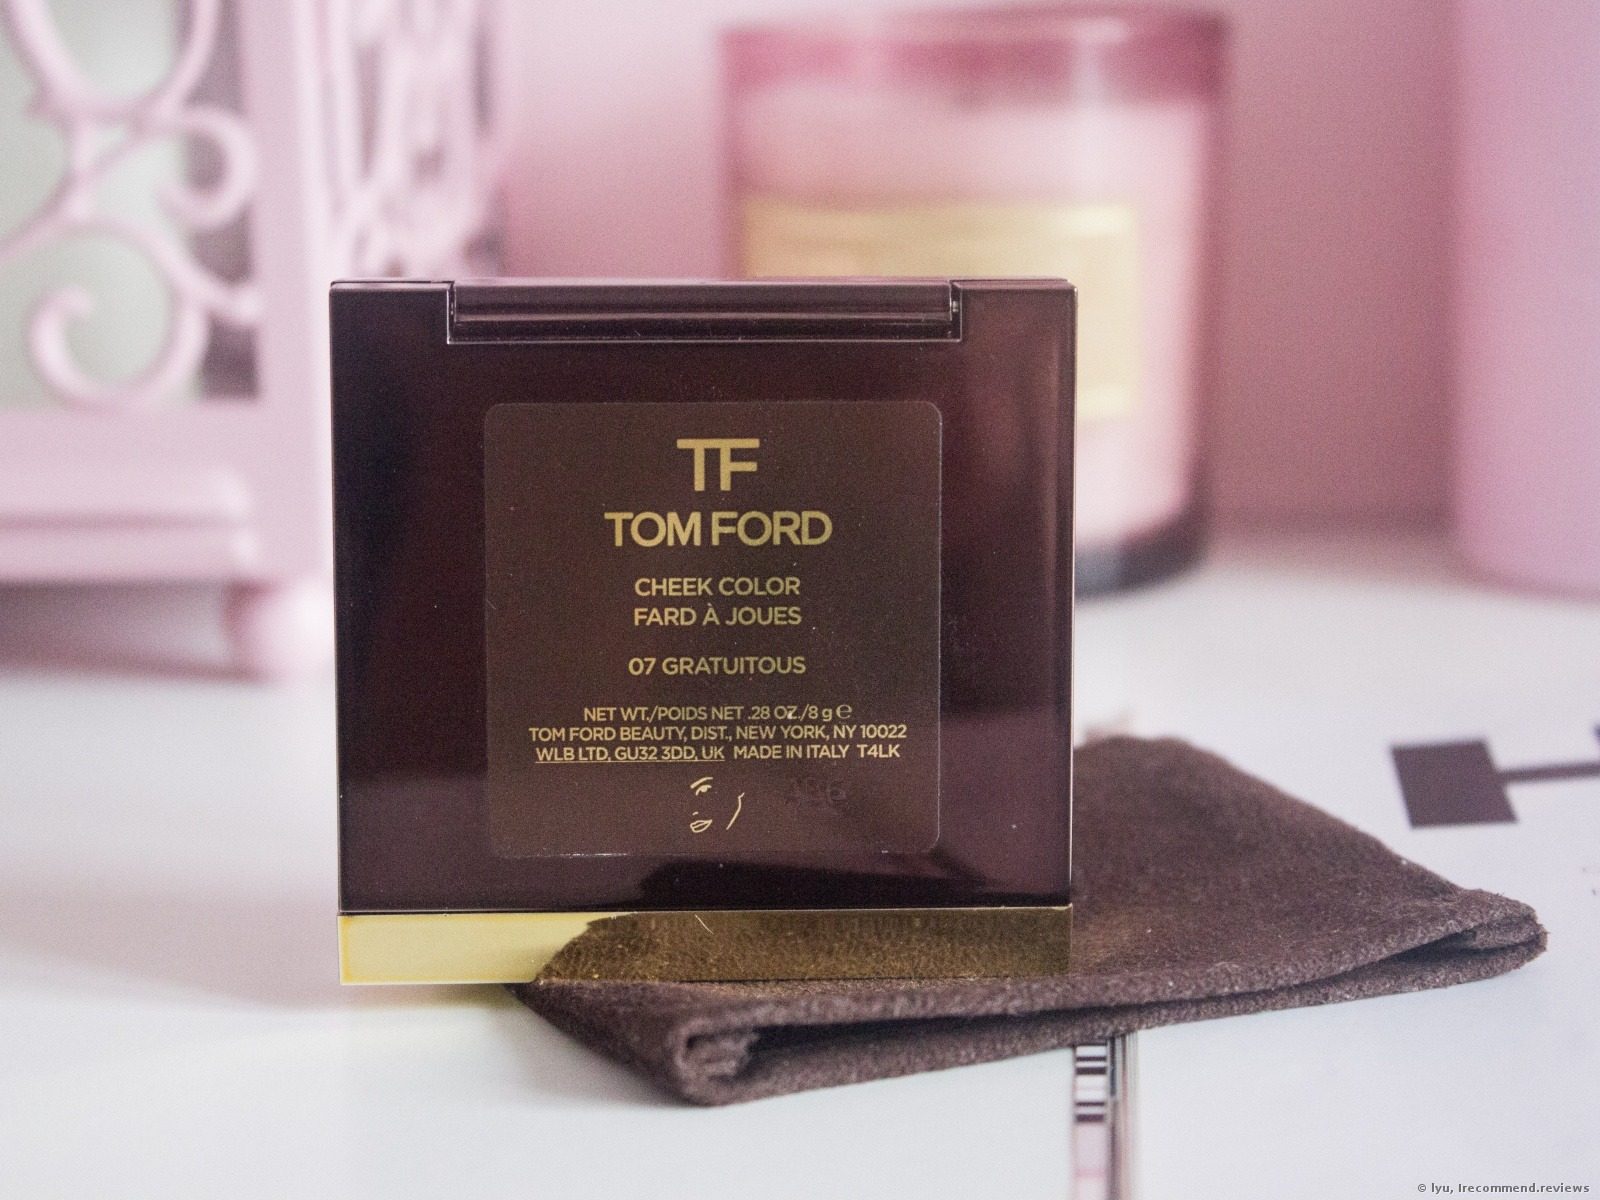 Tom Ford Cheek Color - «?The most expensive blush in my collection?Shade  #07 Gratuitous?Makeup, before/after pictures?» | Consumer reviews